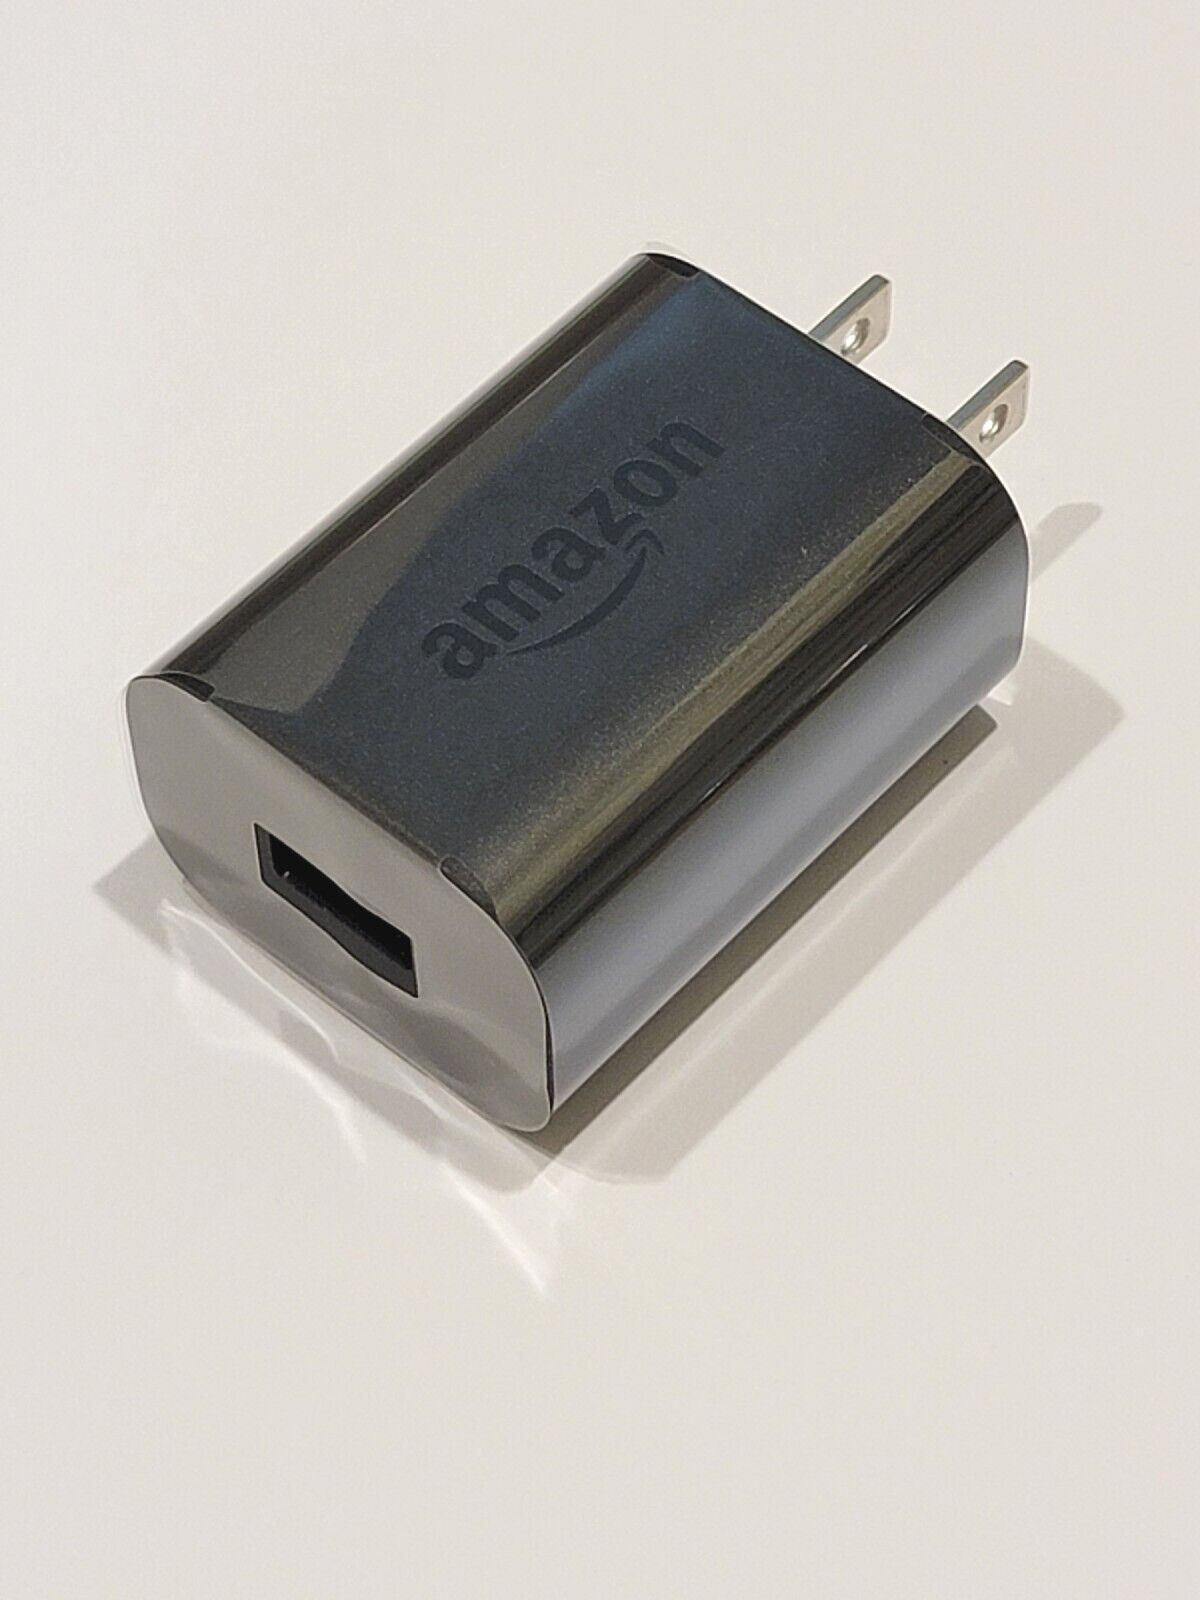 Amazon 9W 1.8A Official OEM USB Charger and Power Adapter NEW